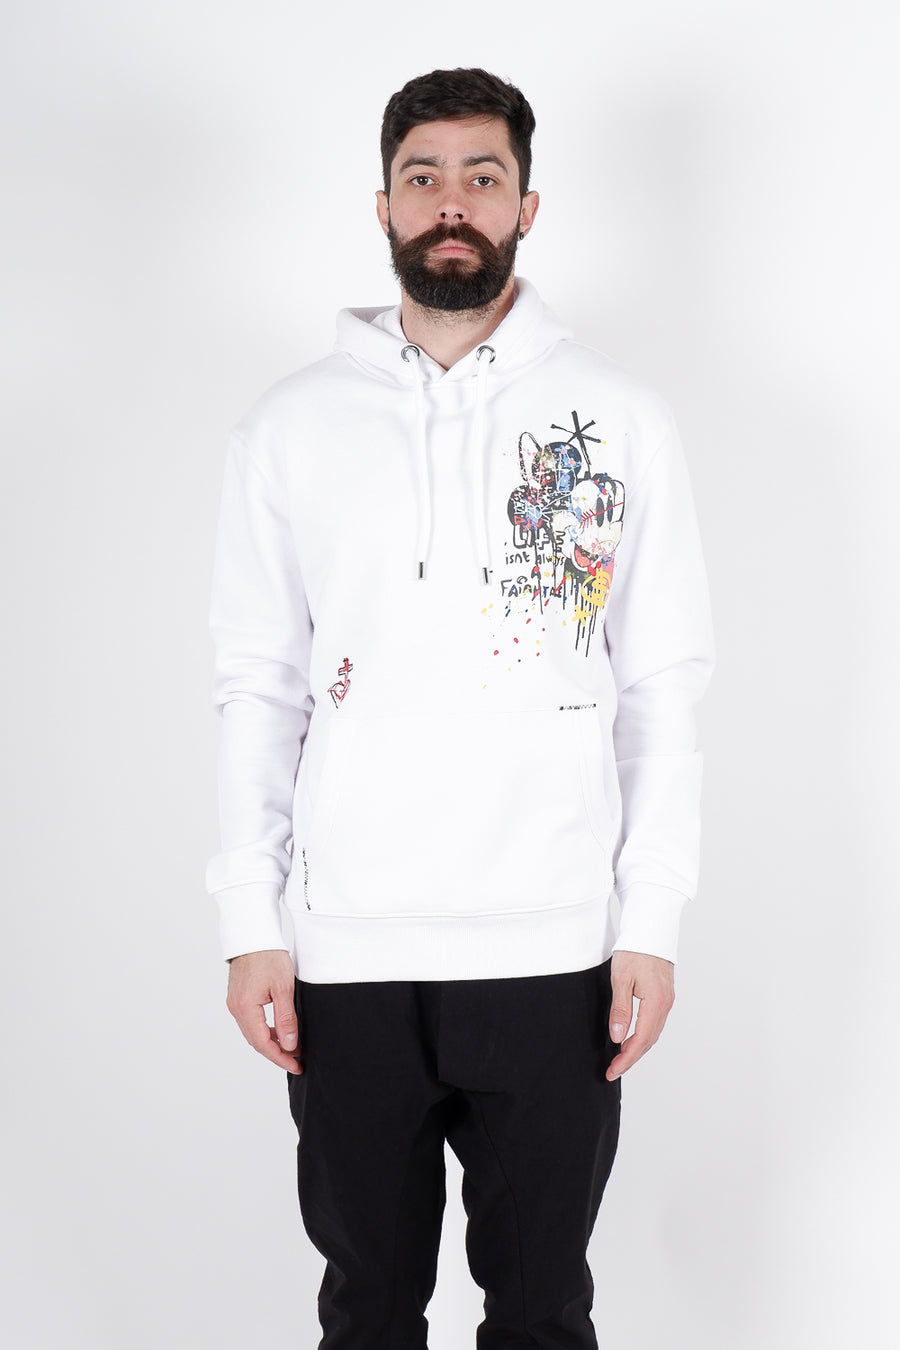 Buy the ABE Mickey Hoodie in White at Intro. Spend £50 for free UK delivery. Official stockists. We ship worldwide.